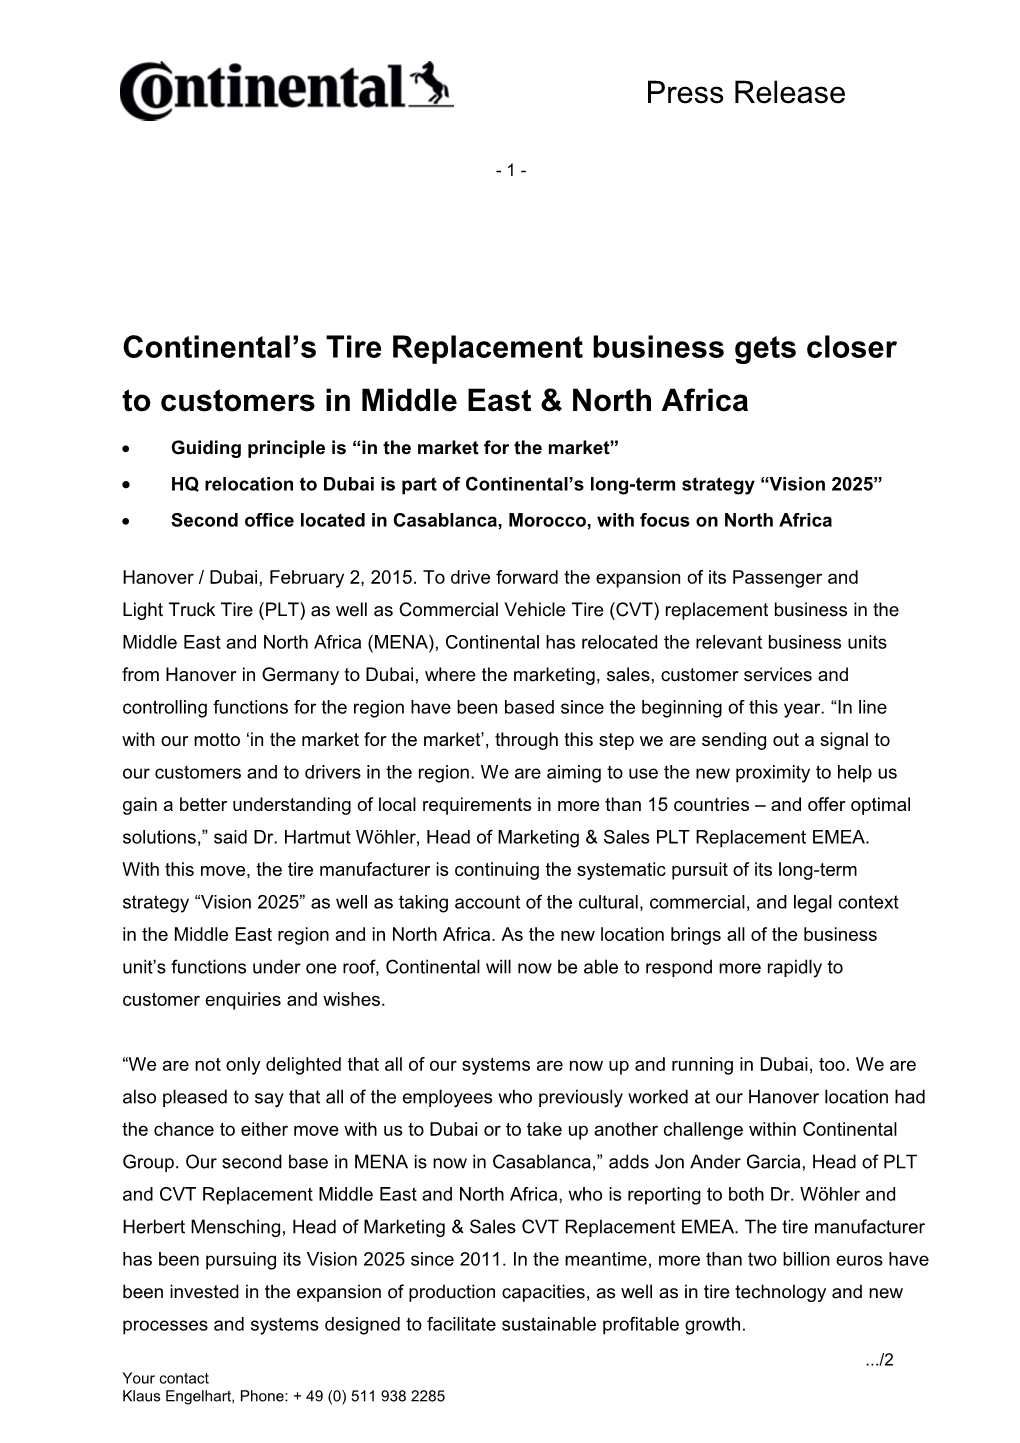 Continental S Tirereplacement Business Gets Closer to Customers in Middle East & North Africa